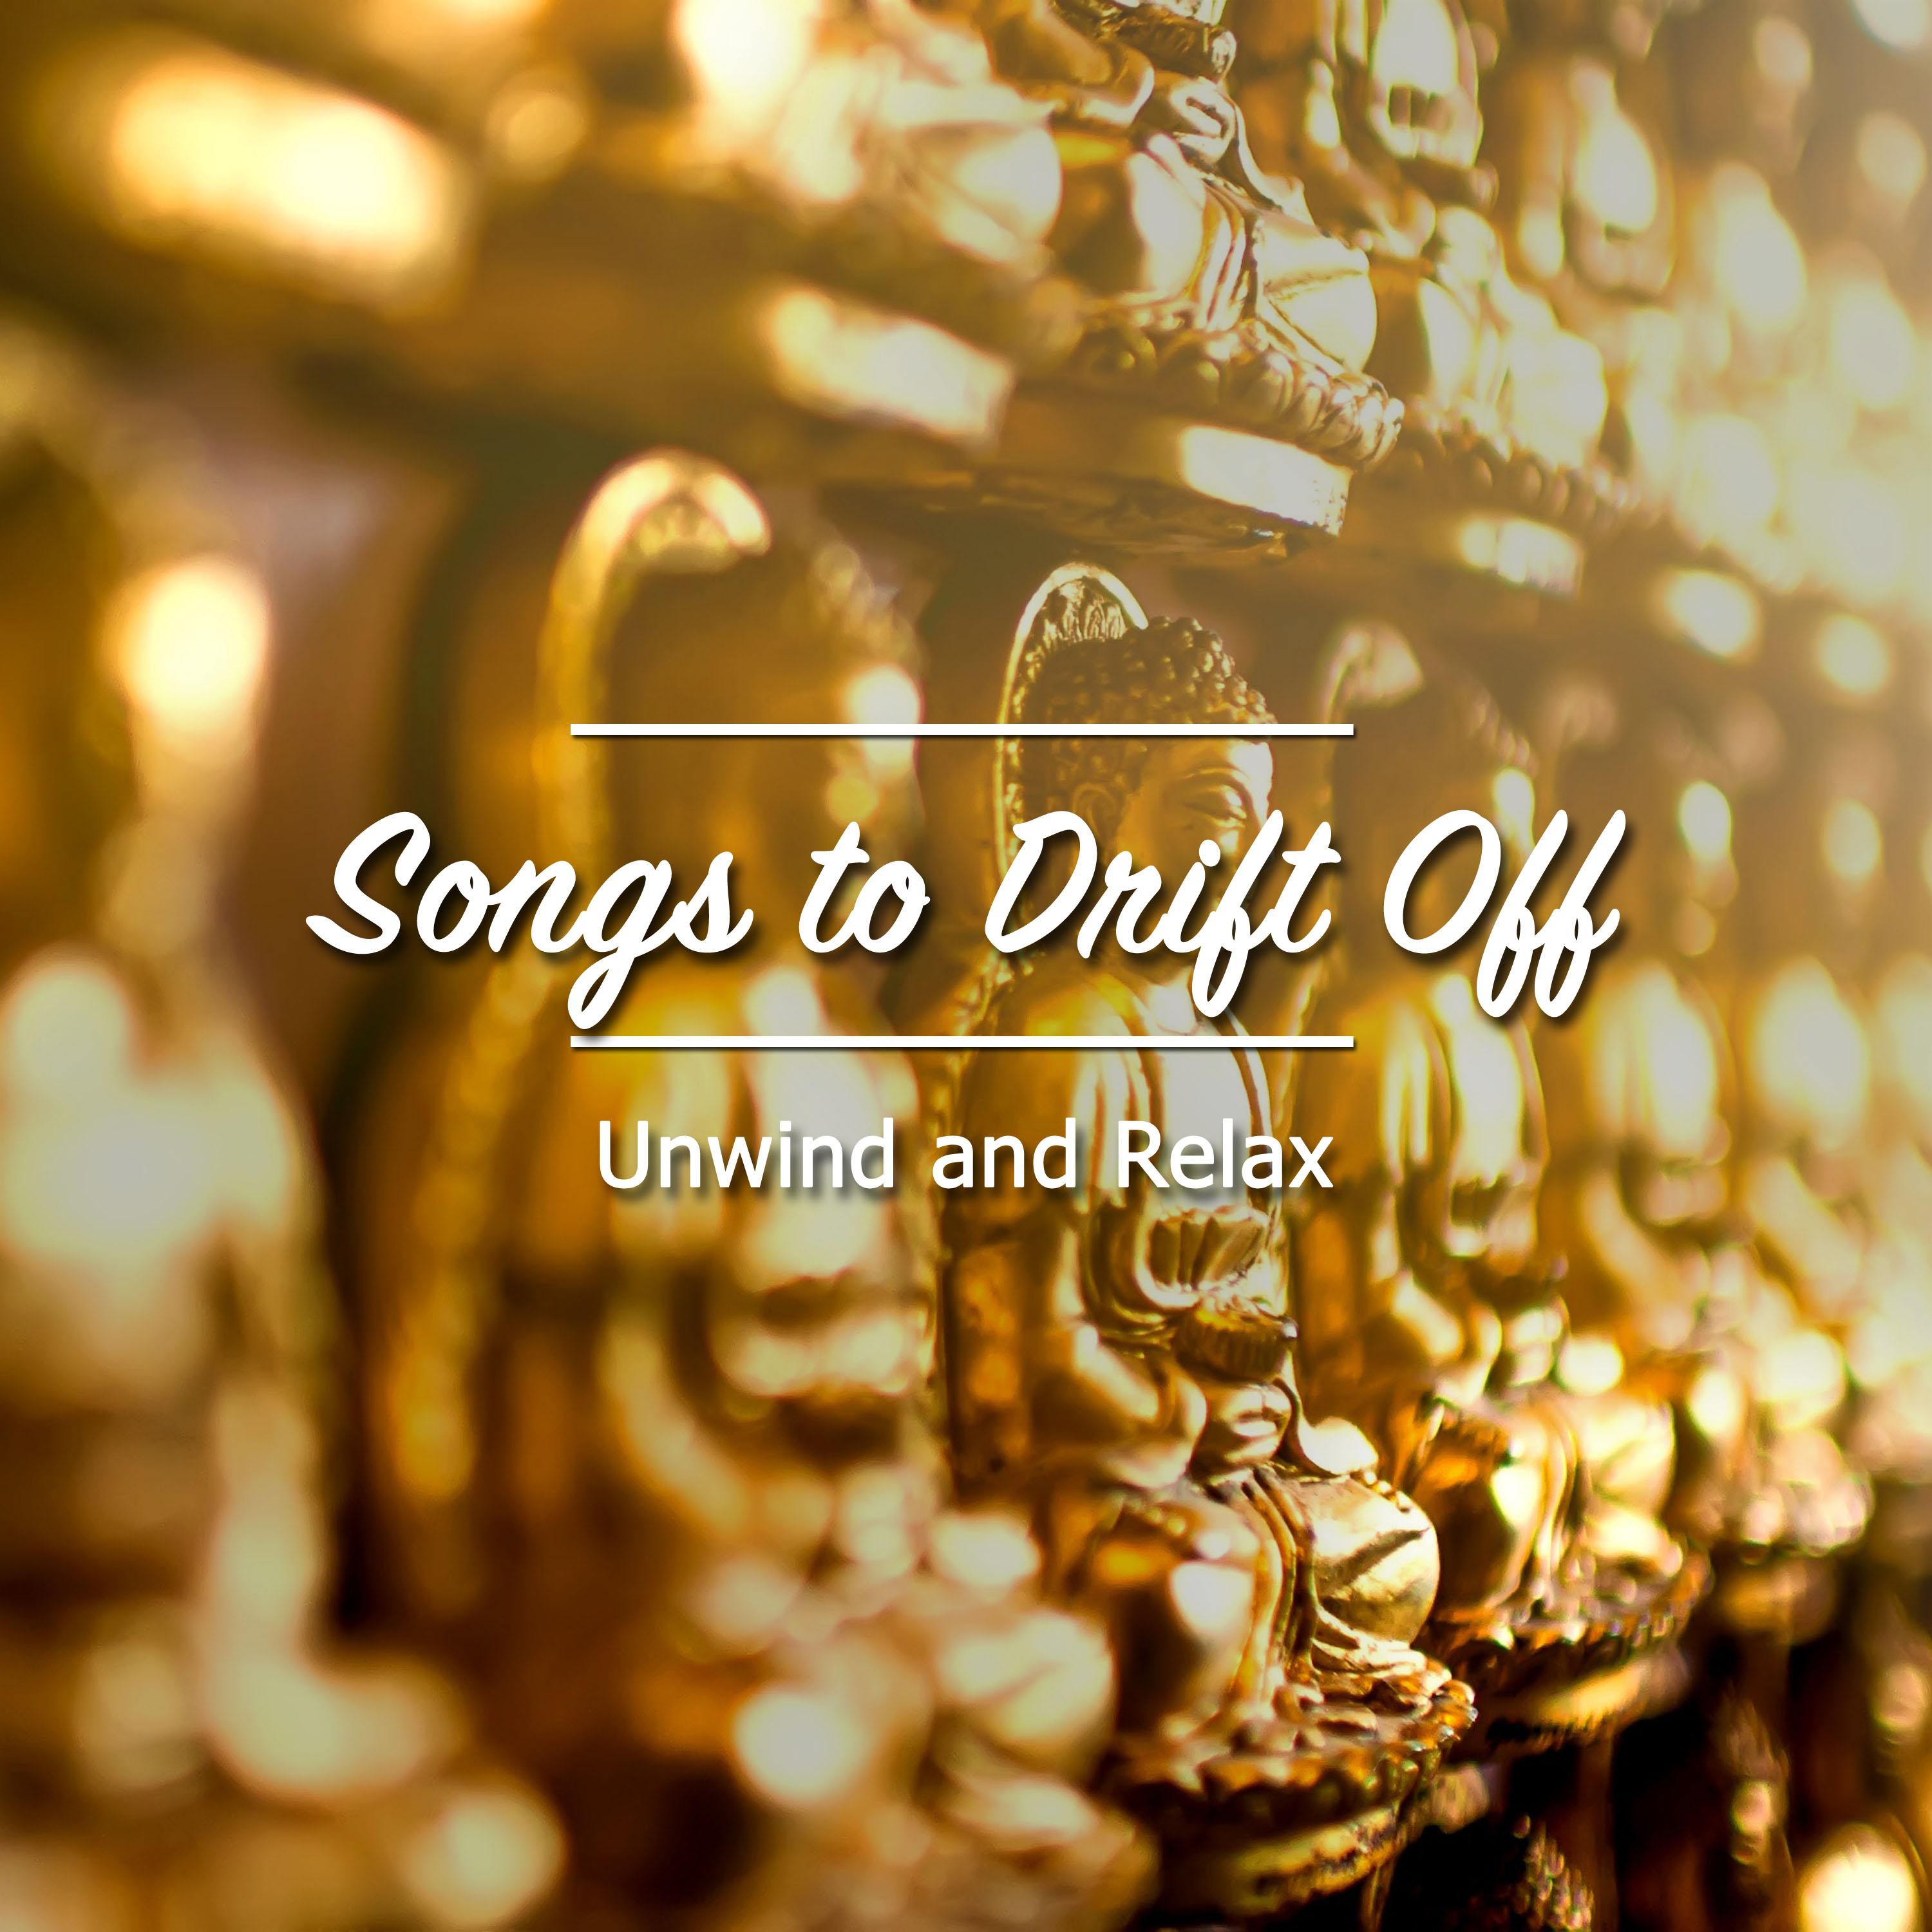 19 Songs to Drift Off, Unwind and Relax